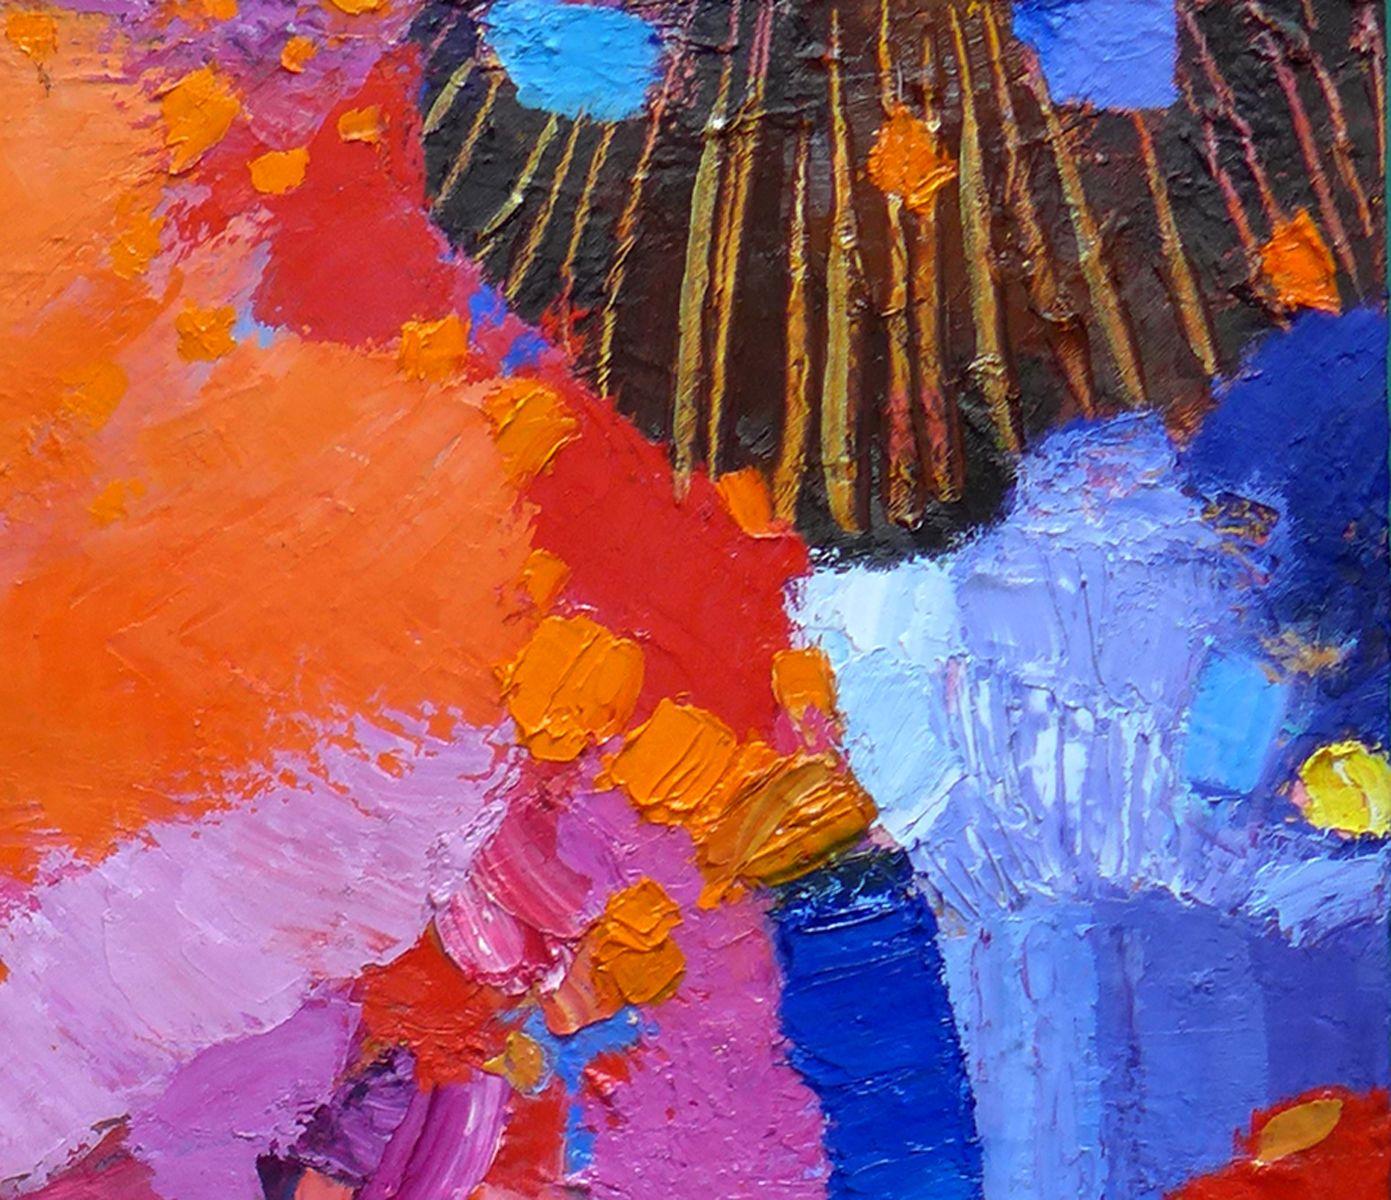 The Colors Throw A Party, Painting, Oil on Canvas 2